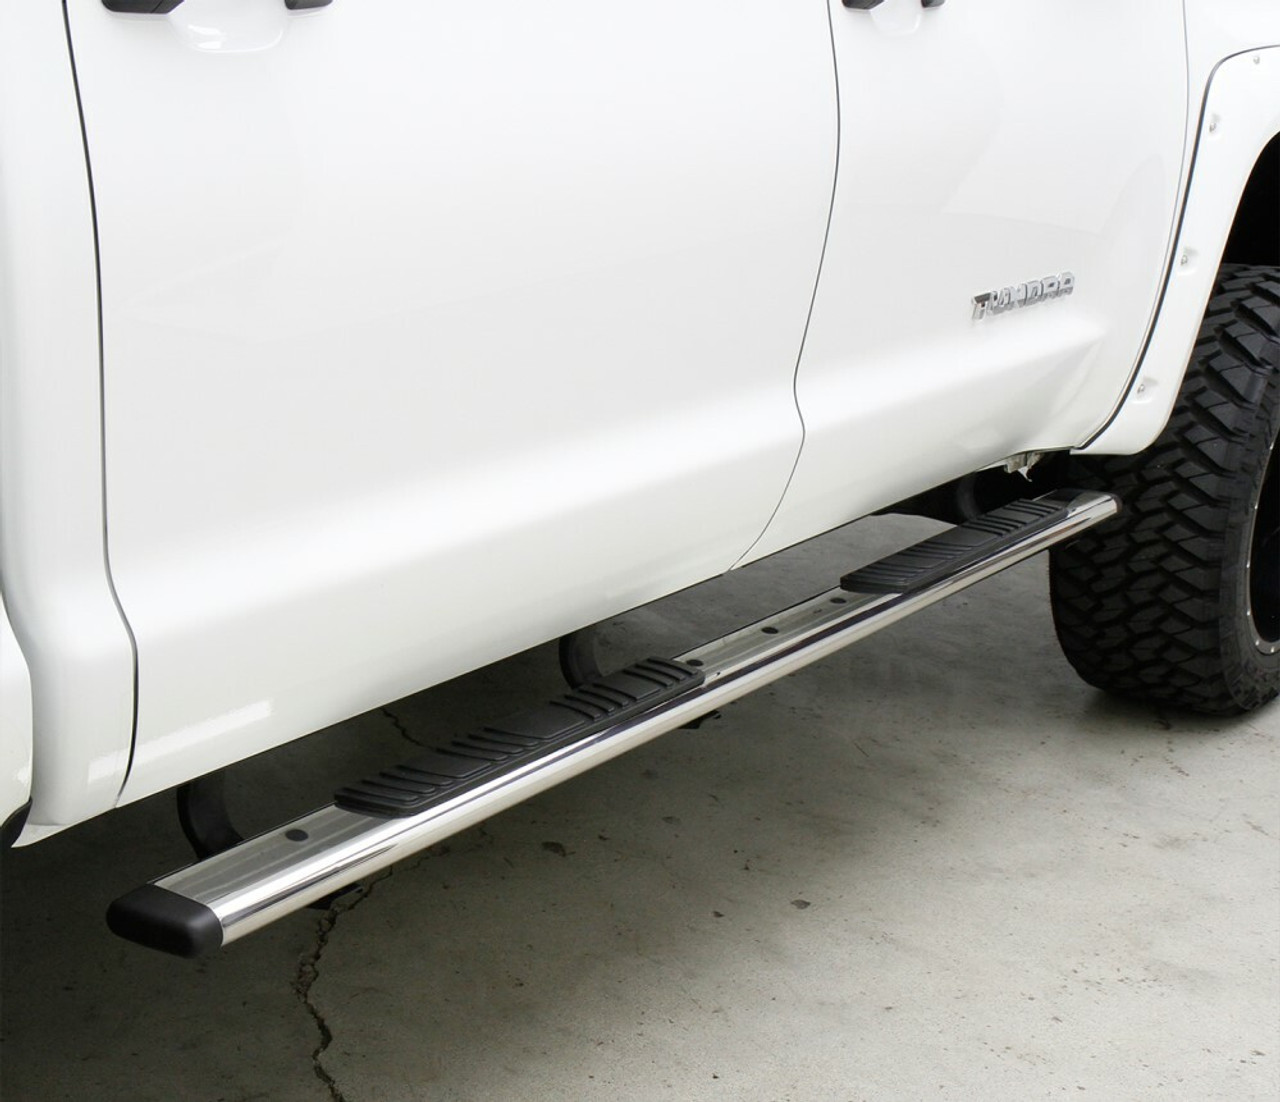 Go Rhino 685404687PS Chevrolet, Silverado 2500HD, 3500HD, 2015 - 2019, 5 inch OE Xtreme Low Profile - Complete Kit: Stainless steel, Polished, 650087PS side bars + 6840465 OE Xtreme Brackets. 5 inch wide x 87 inch long side bars.  Gasoline only